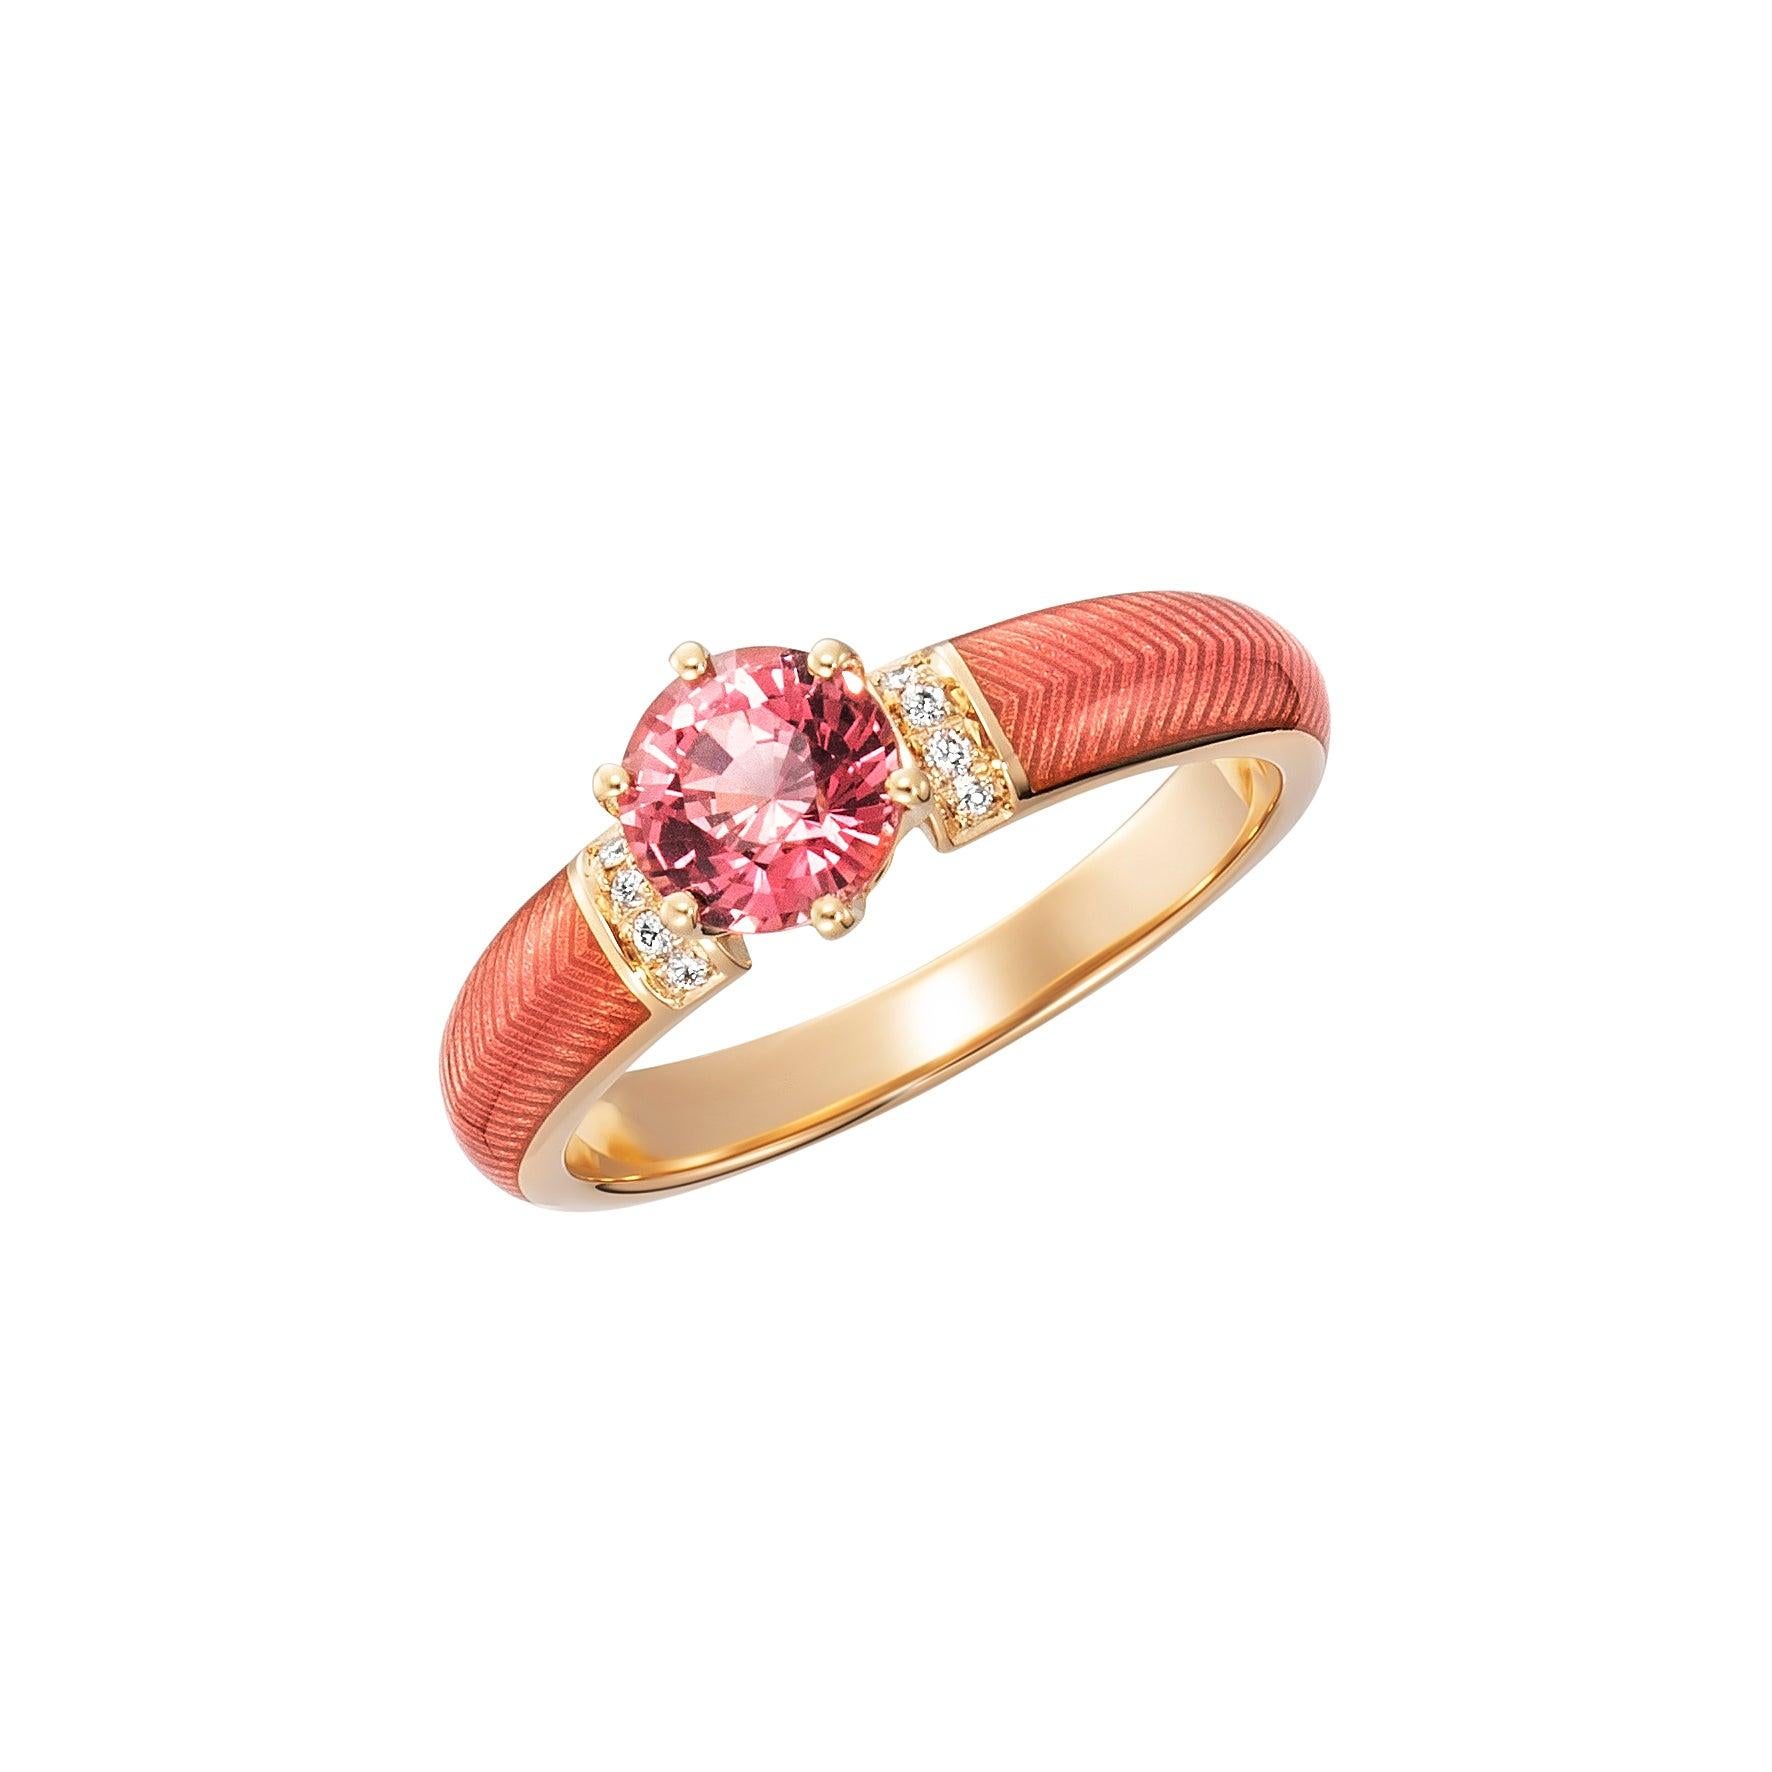 For Sale:  Solitaire Pink Tourmaline Ring 18k Yellow Gold Pink Enamel 8 Diamonds  4